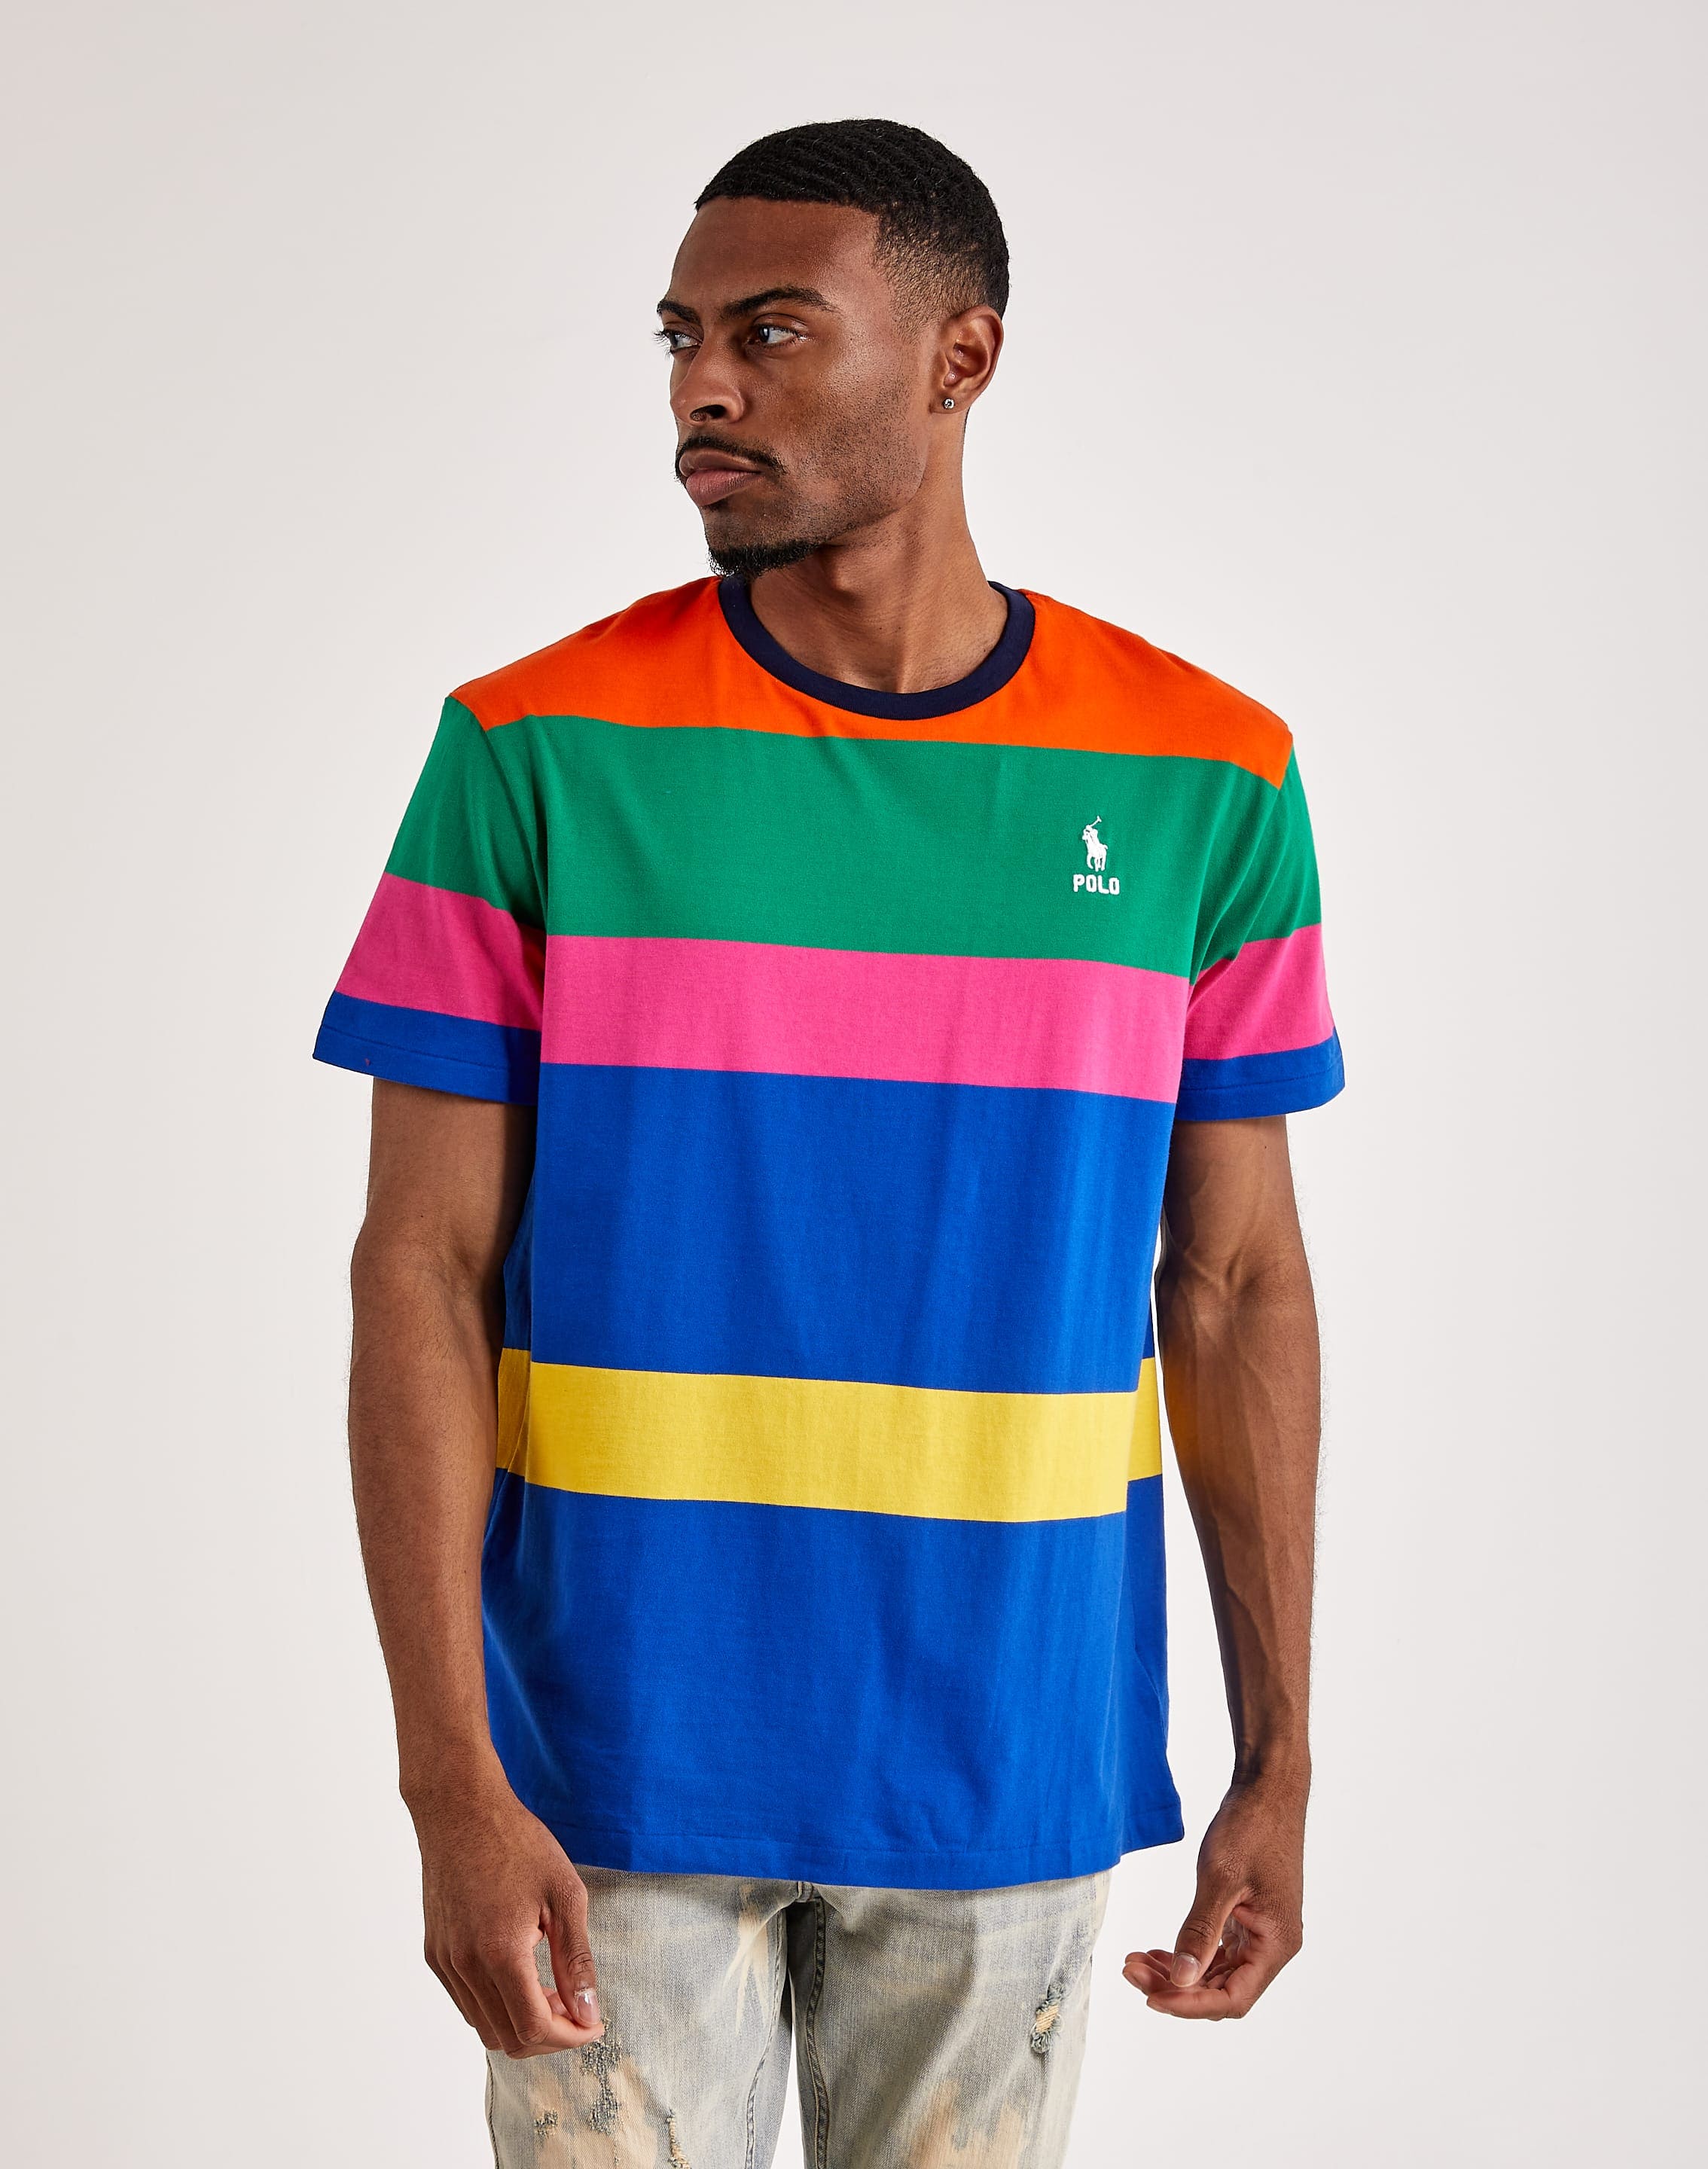 Polo Ralph Lauren Classic Fit Striped Jersey Tee – DTLR